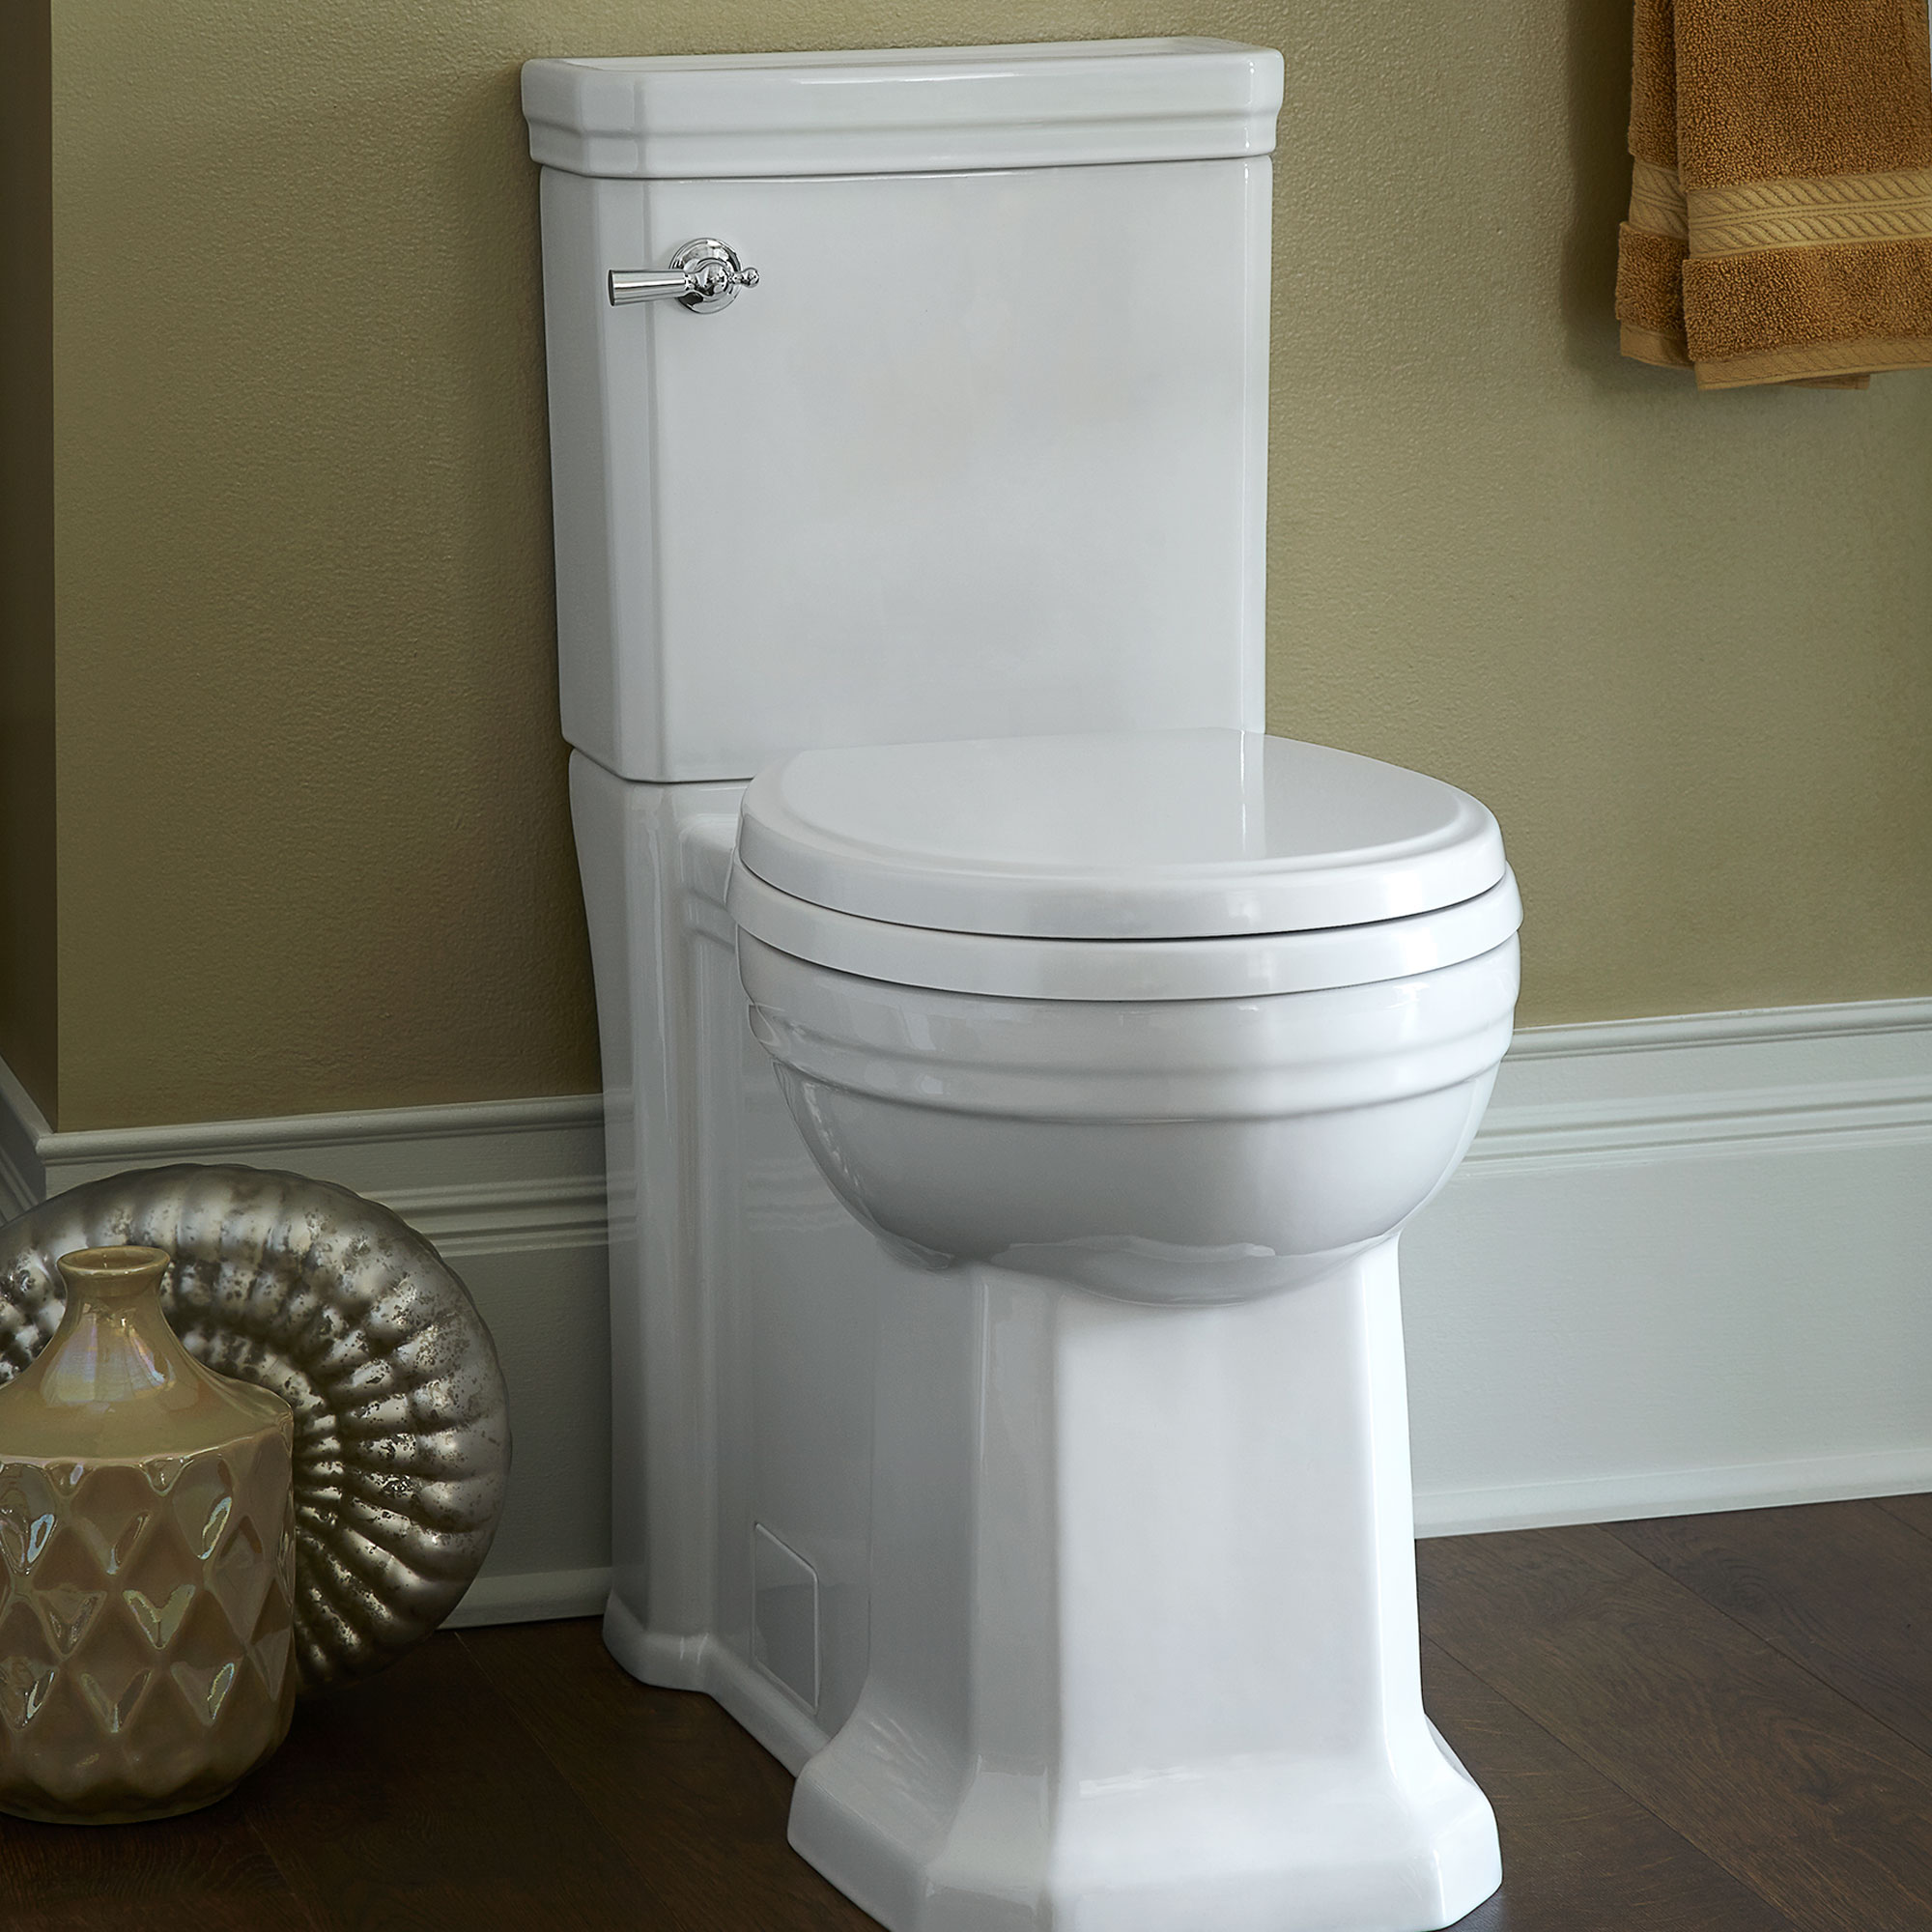 Fitzgerald Two-Piece Chair Height Round Front Toilet with Seat